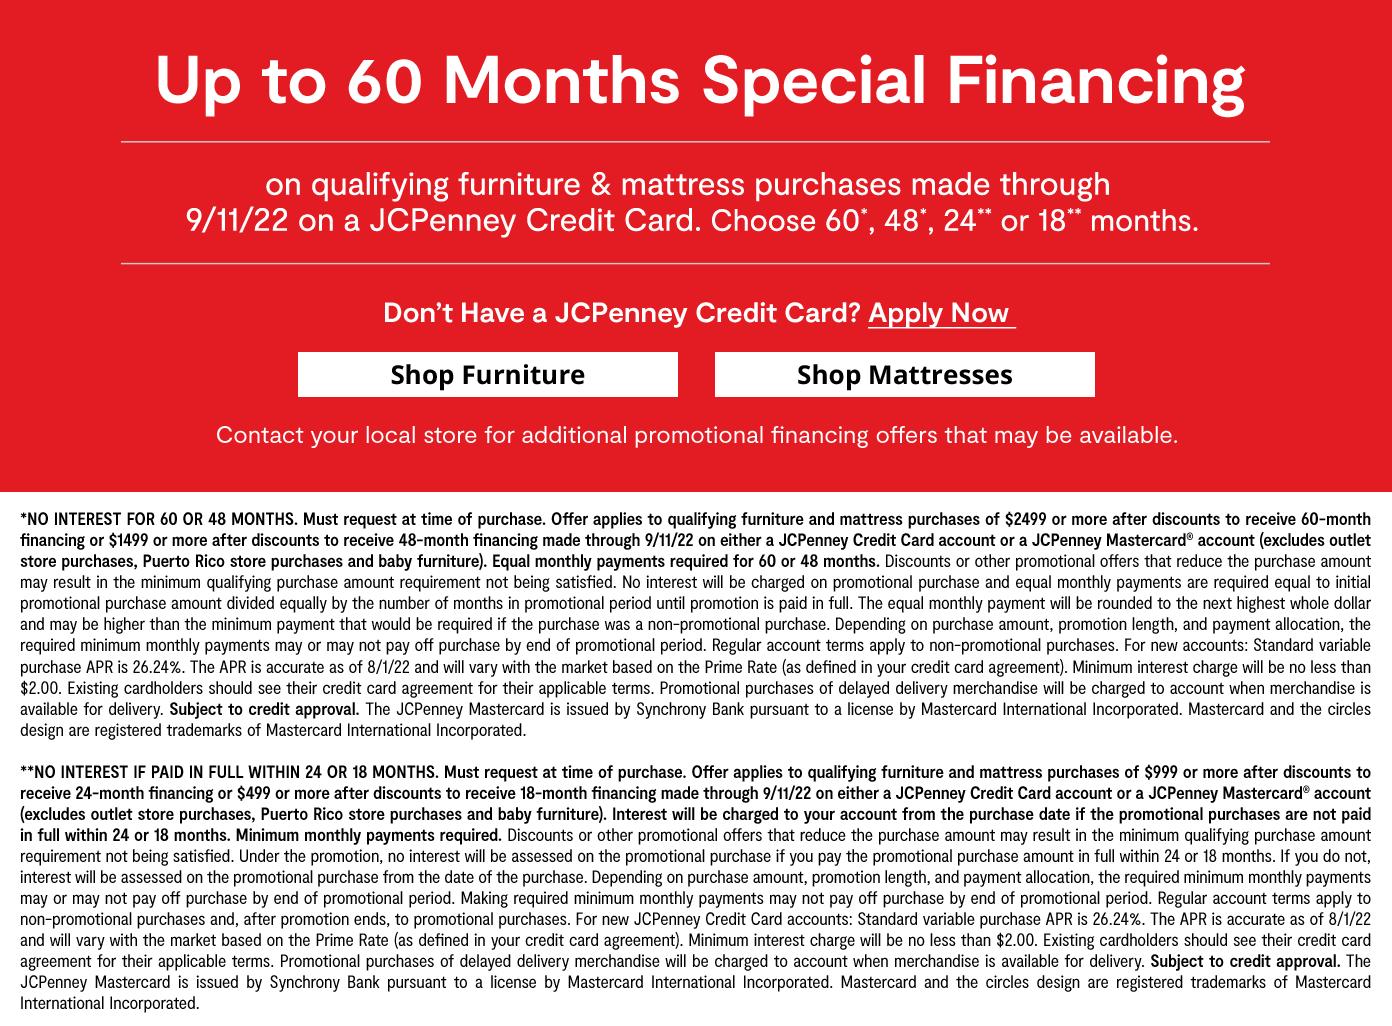 Up to 60 months special financing on qualifying furniture & mattress purchases by 9/11/22 on JCPenney Credit Card. Choose 60, 48,24, or 18 months. learn more